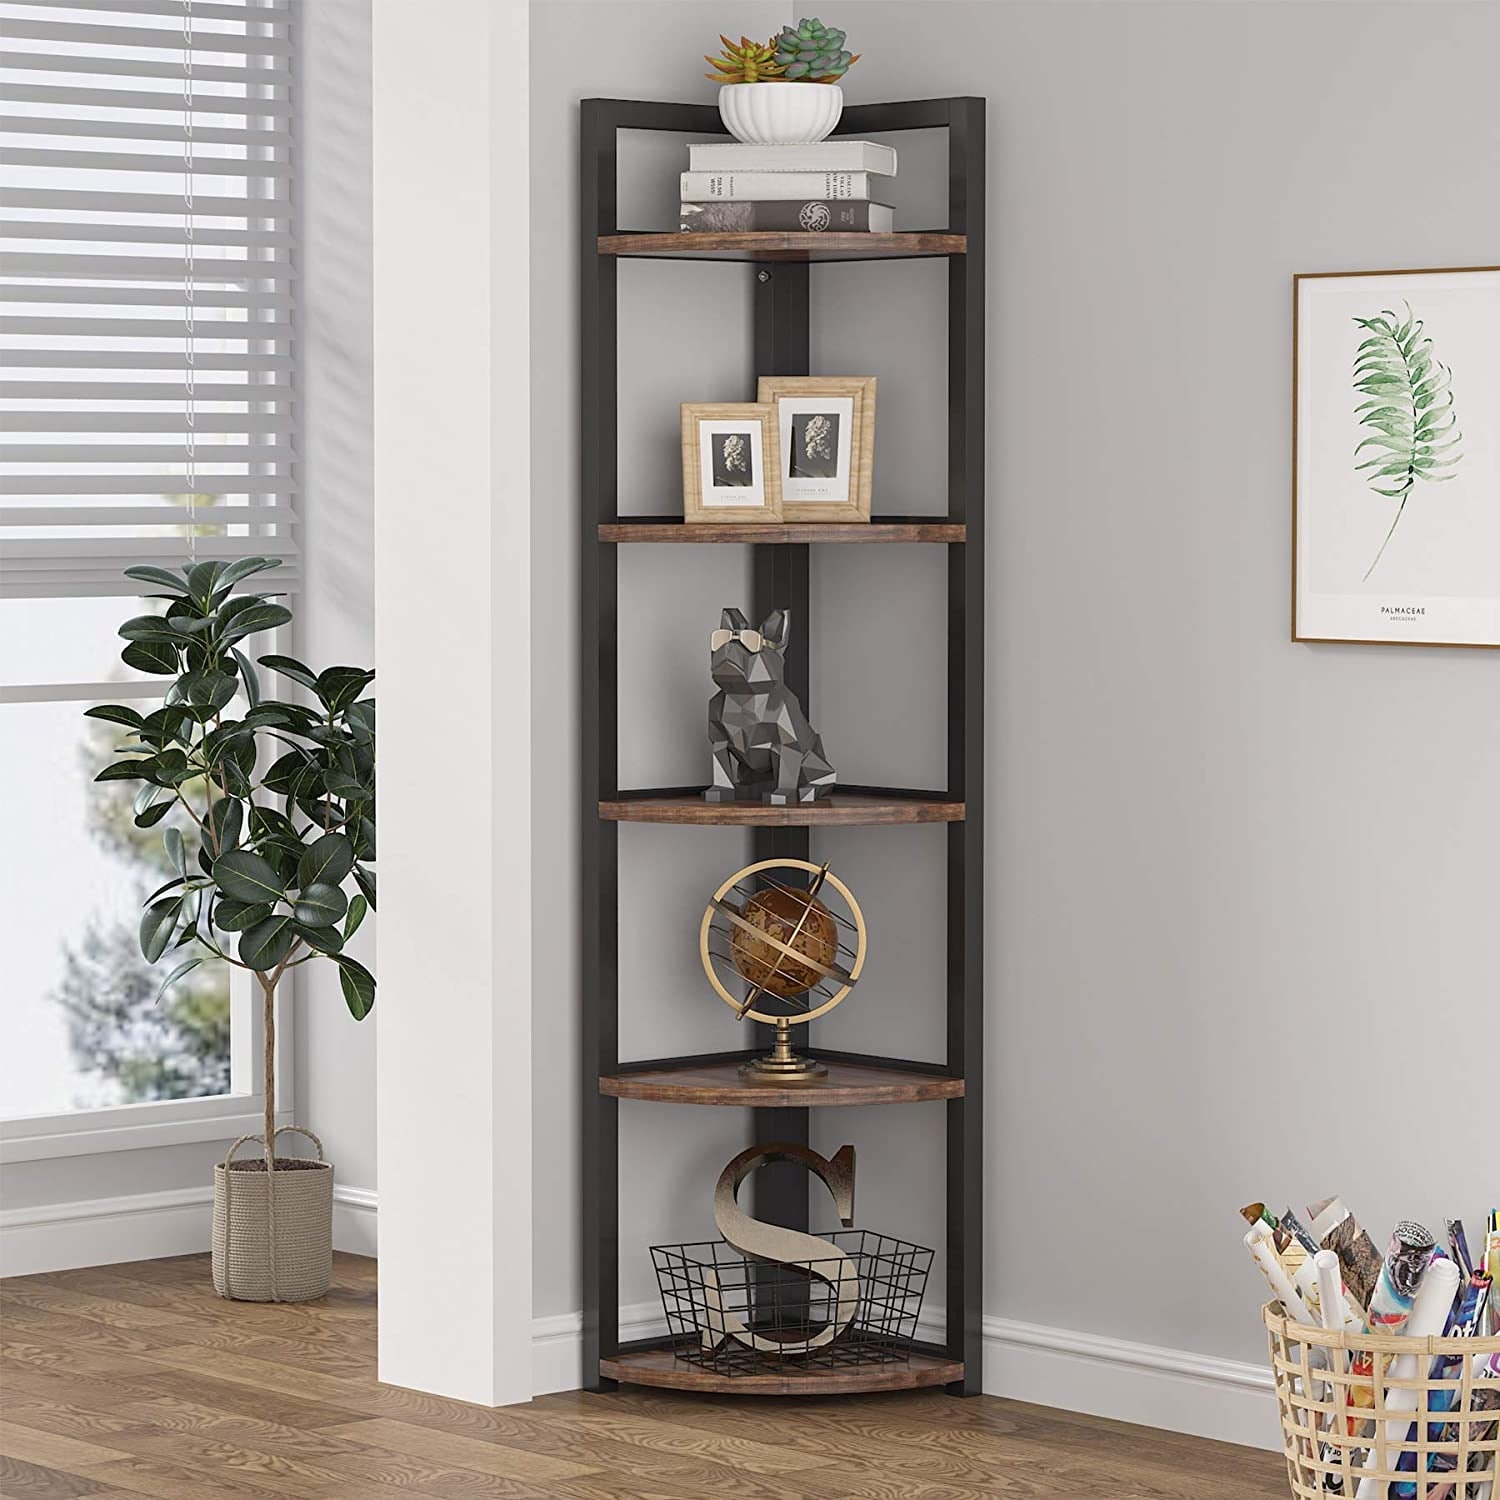 https://ak1.ostkcdn.com/images/products/is/images/direct/17298ee2b05a7c8e0897b1bb60d2502e2932706f/Tribesigns-Industrial-5-Tier-Corner-Shelf-Bookshelf--Bookcase-Plant-Stand.jpg